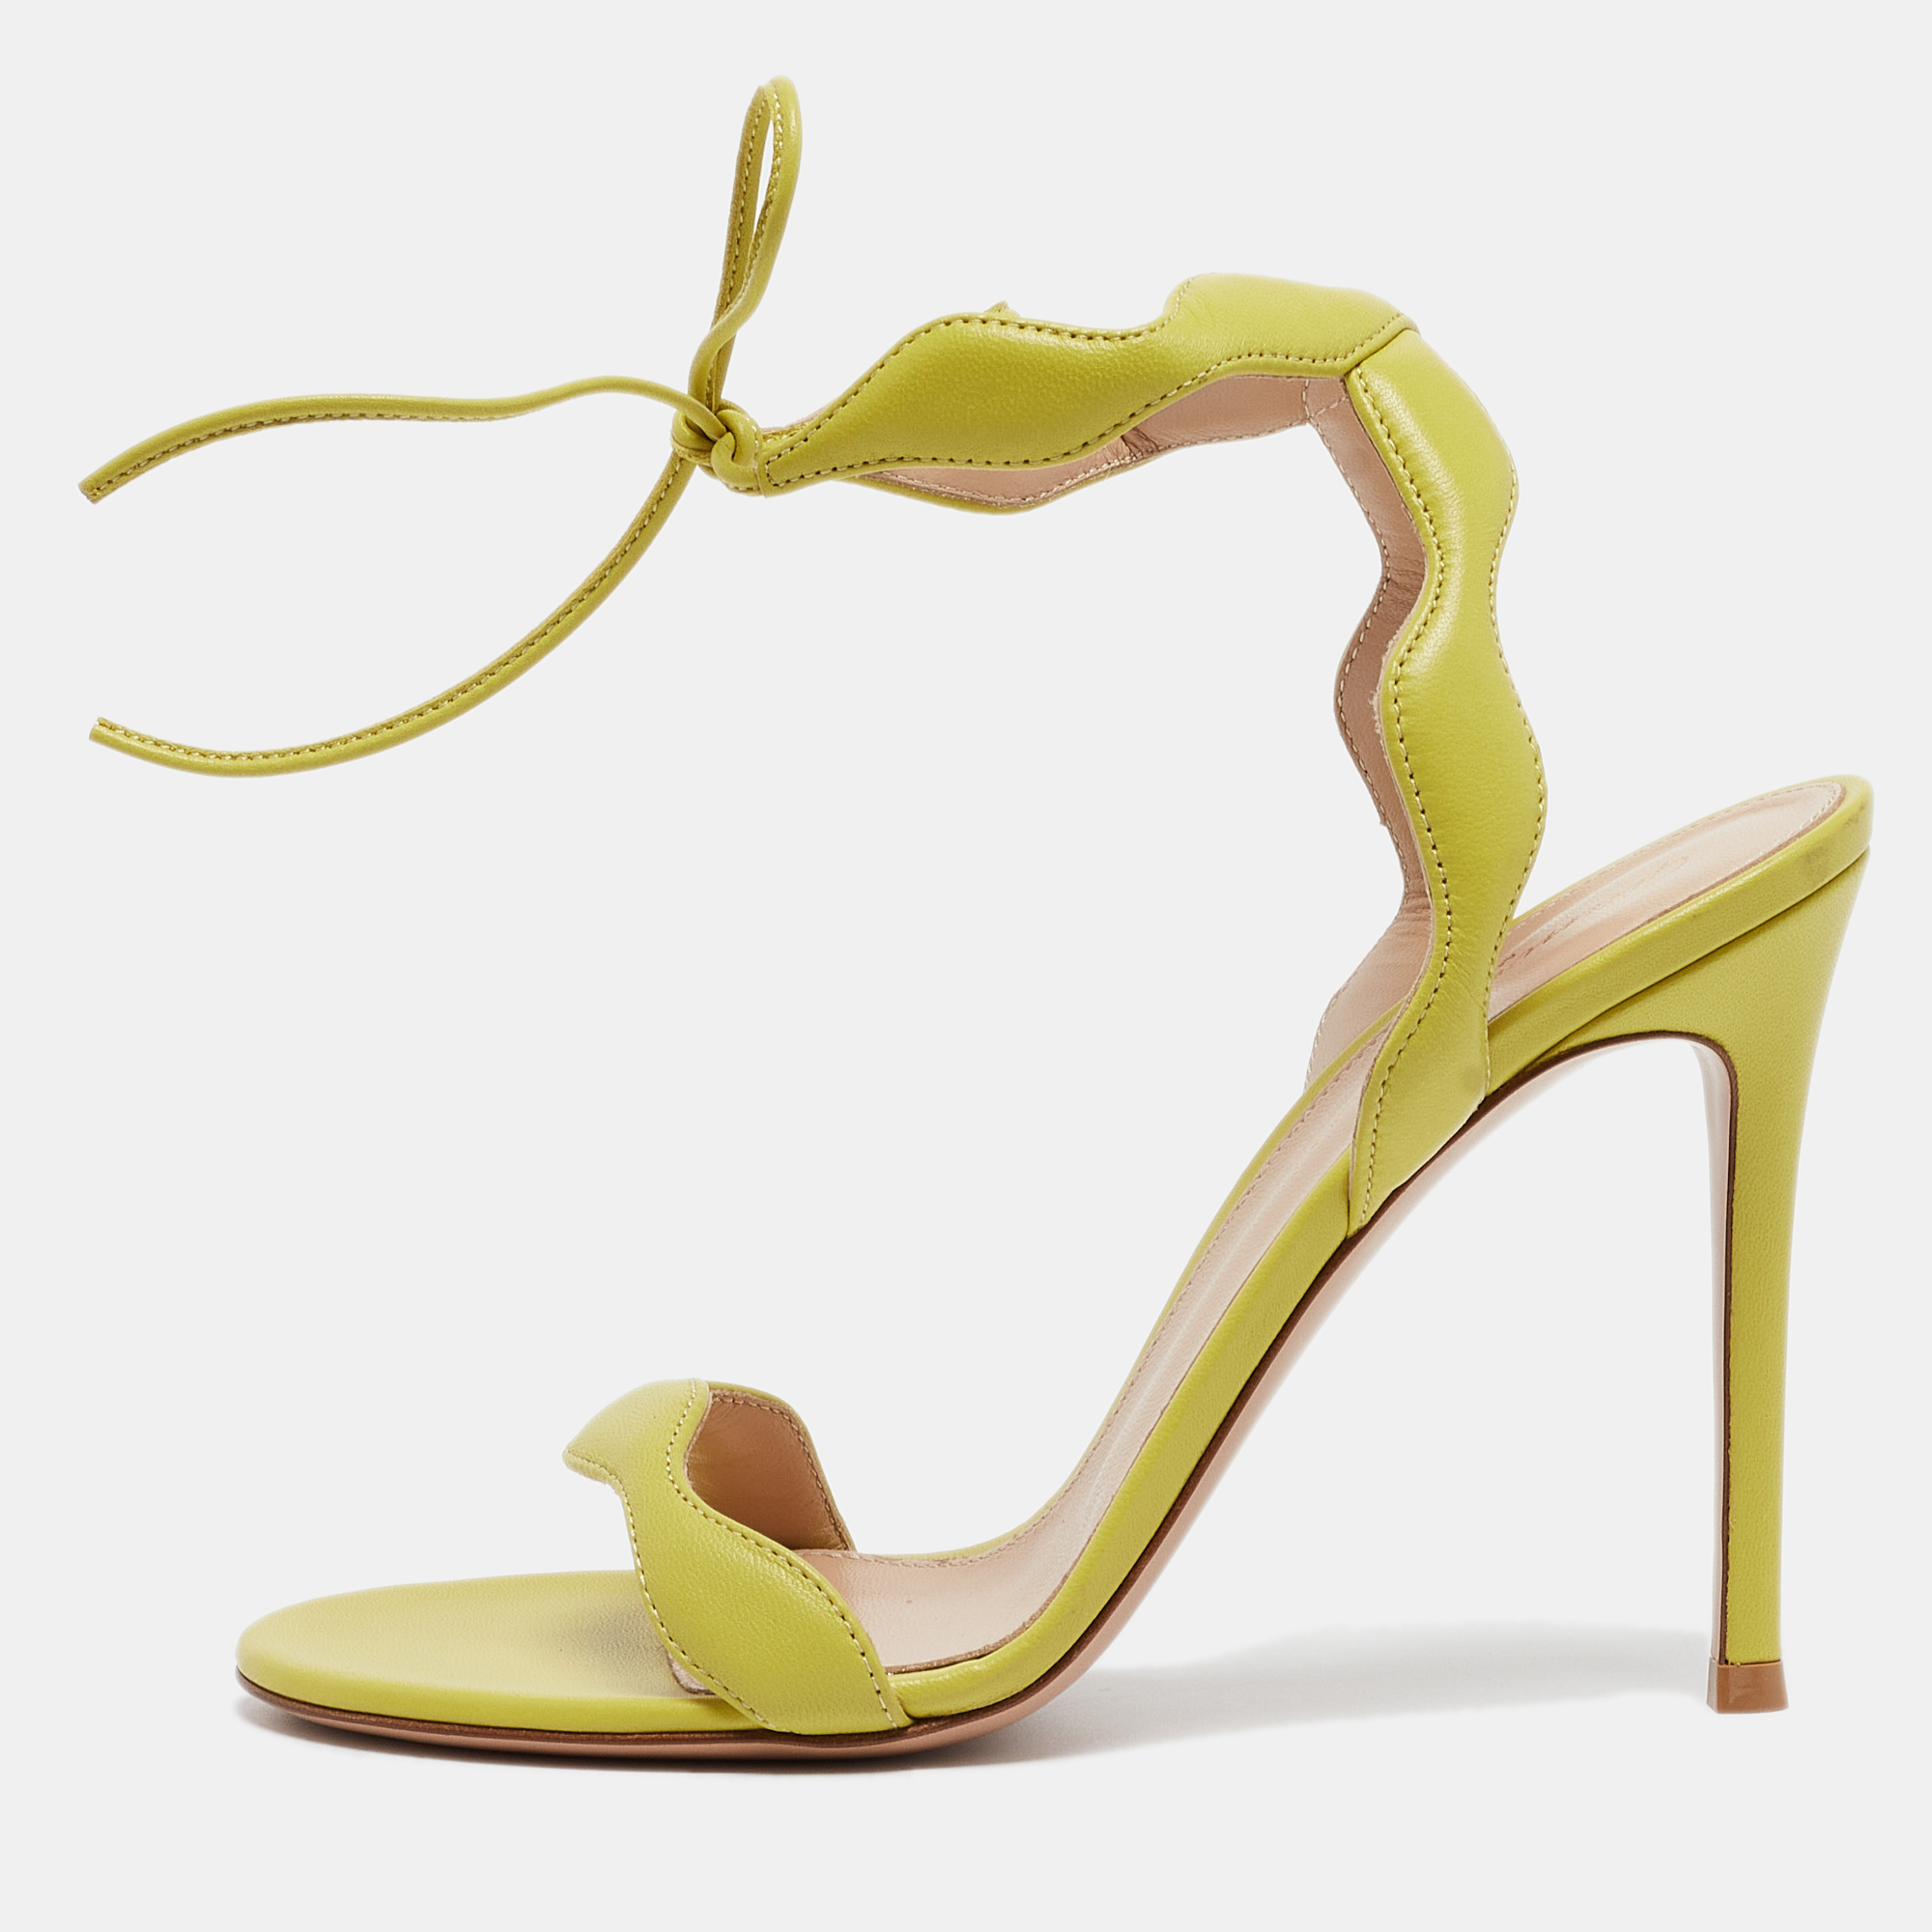 Gianvito rossi light green leather wavy ankle tie sandals size 37